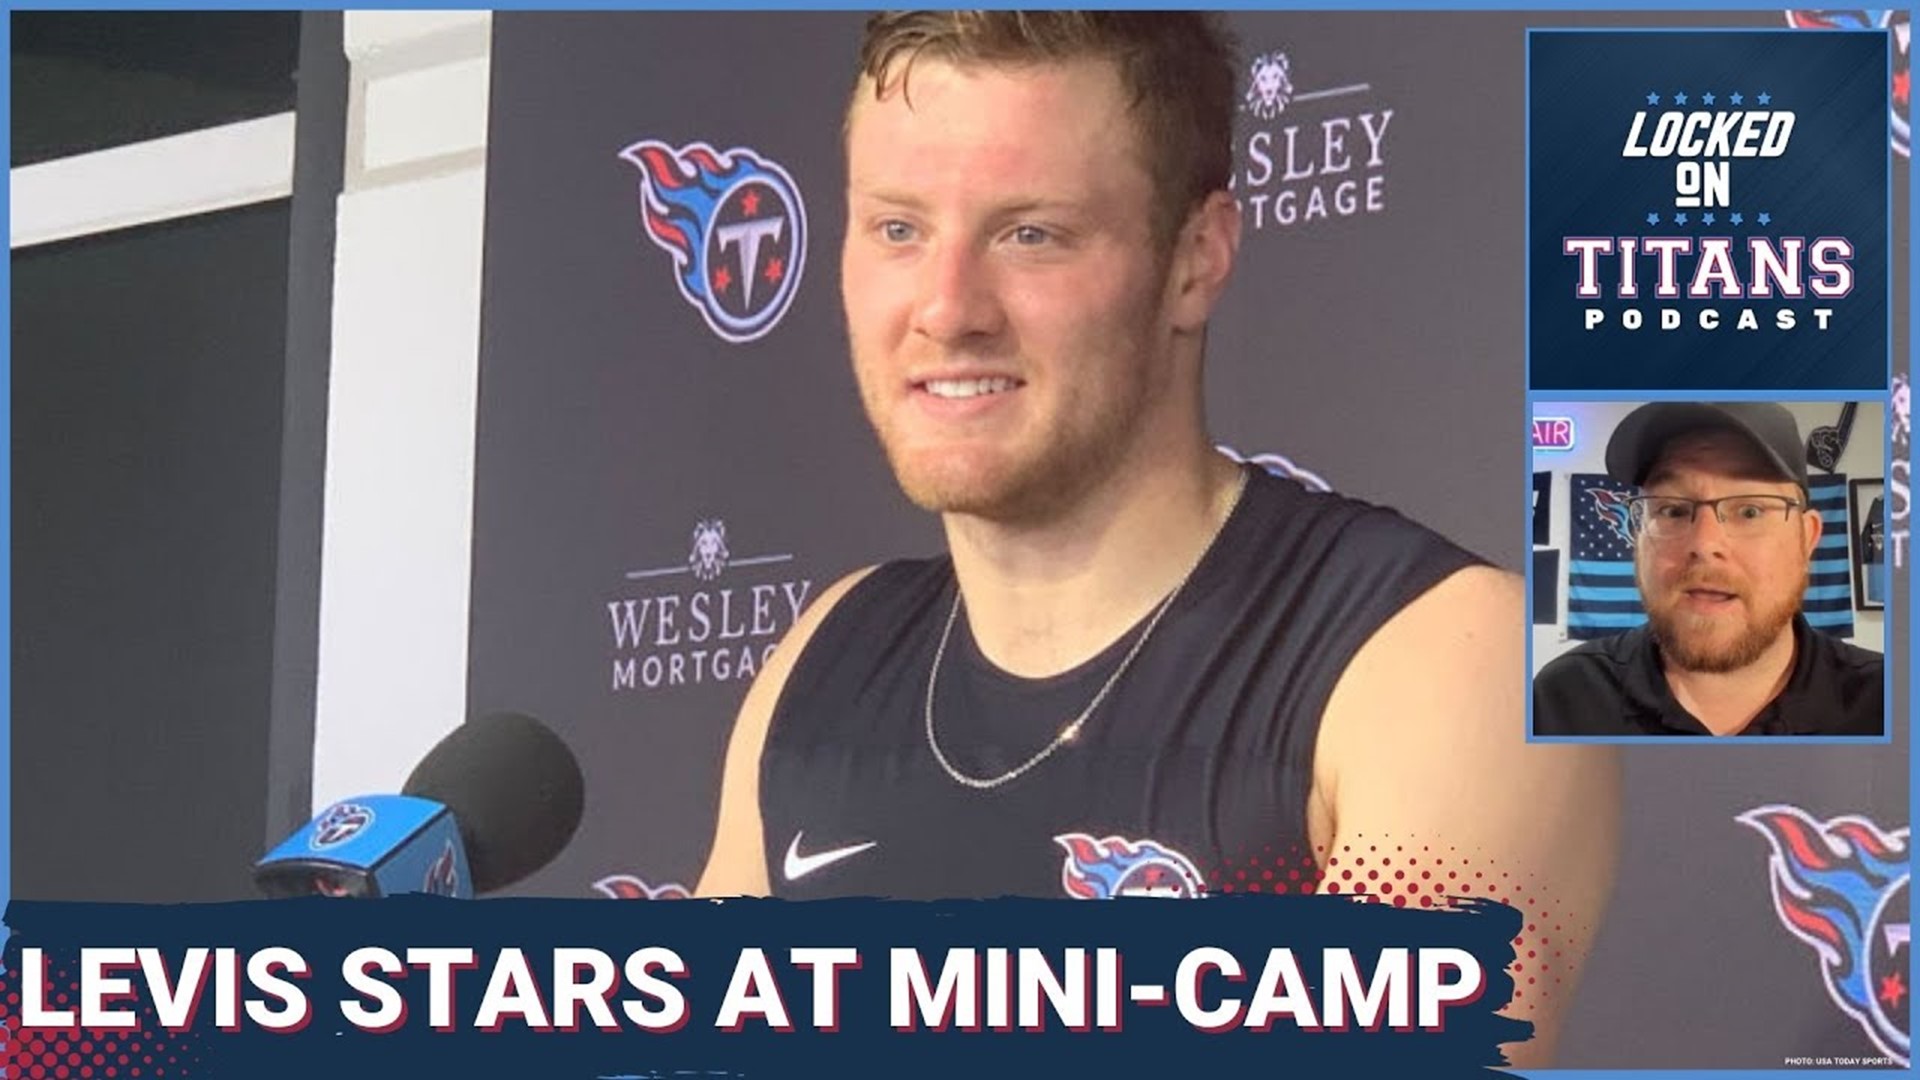 The Tennessee Titans rookie mini-camp took place over the weekend and rookie QB Will Levis was the talk of the weekend. Tyler goes over the Levis' performance